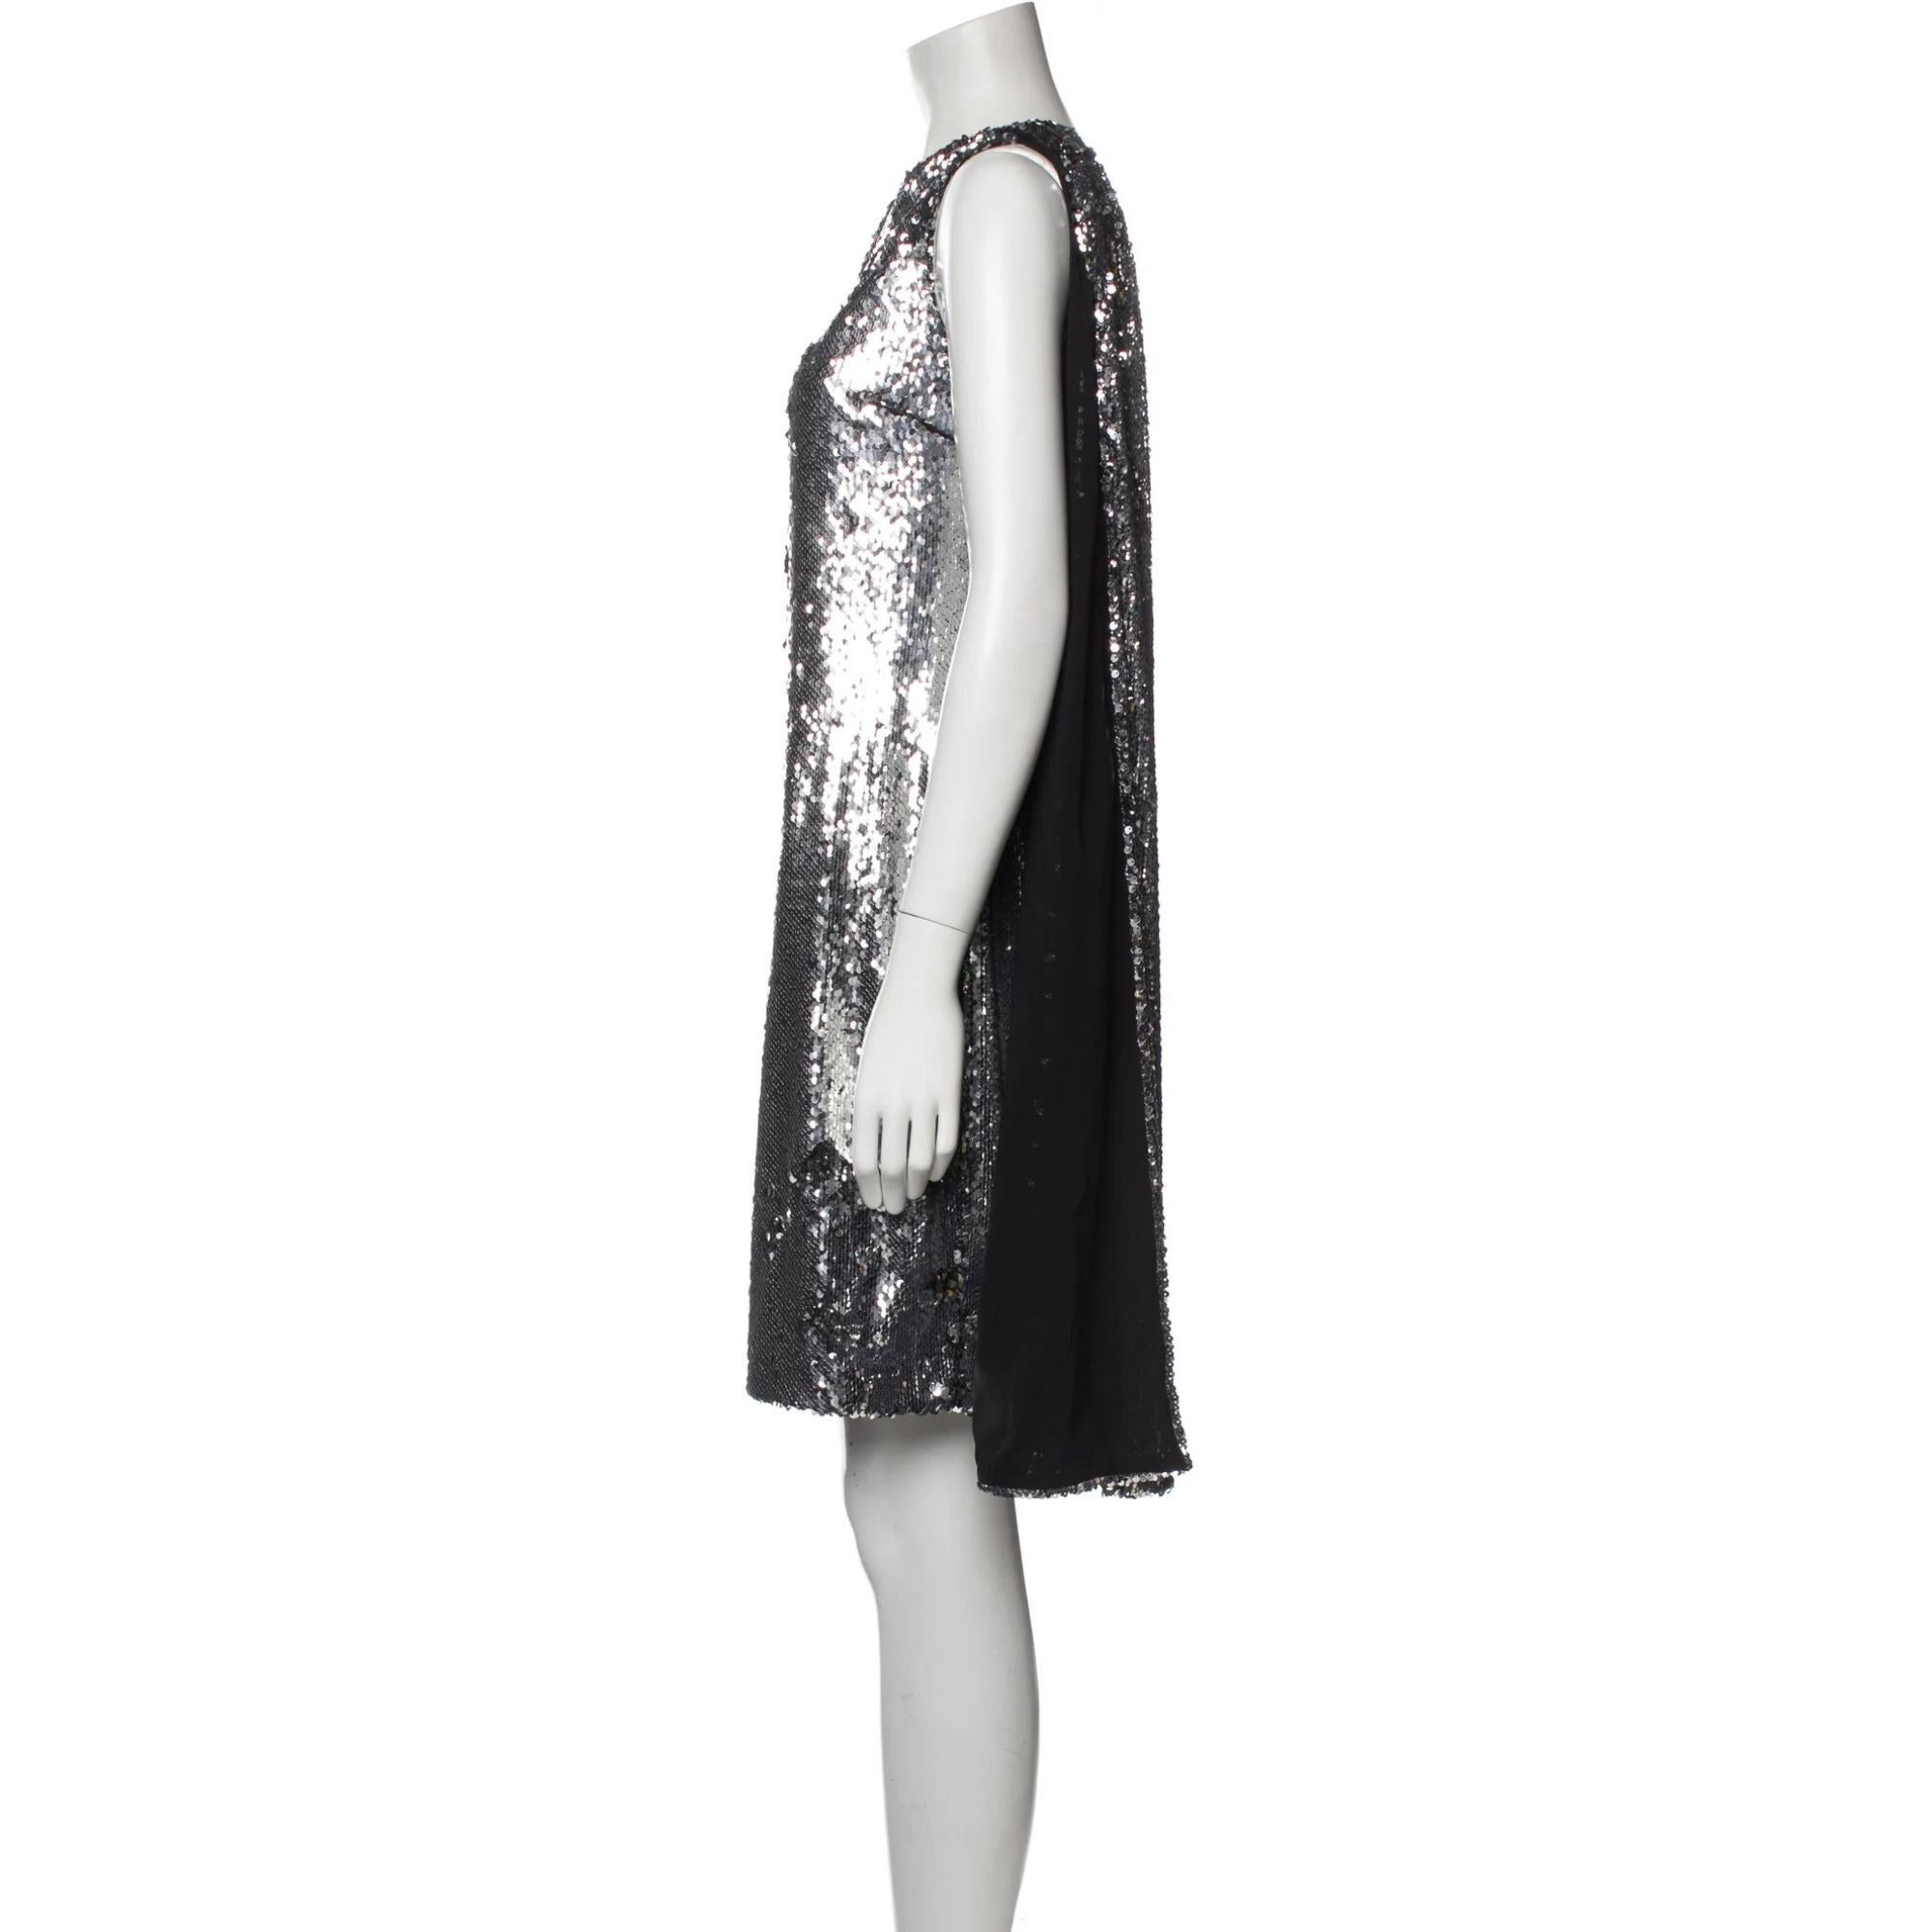 Stella McCartney Shift Dress. Silver. Sequin Embellishments. Sleeveless with One-Shoulder. Concealed Zip Closure at Side. Designer Fit: Dresses by Stella McCartney typically fit true to size.

Color: Silver
Material: 100% Polyurethane; Lining 100%